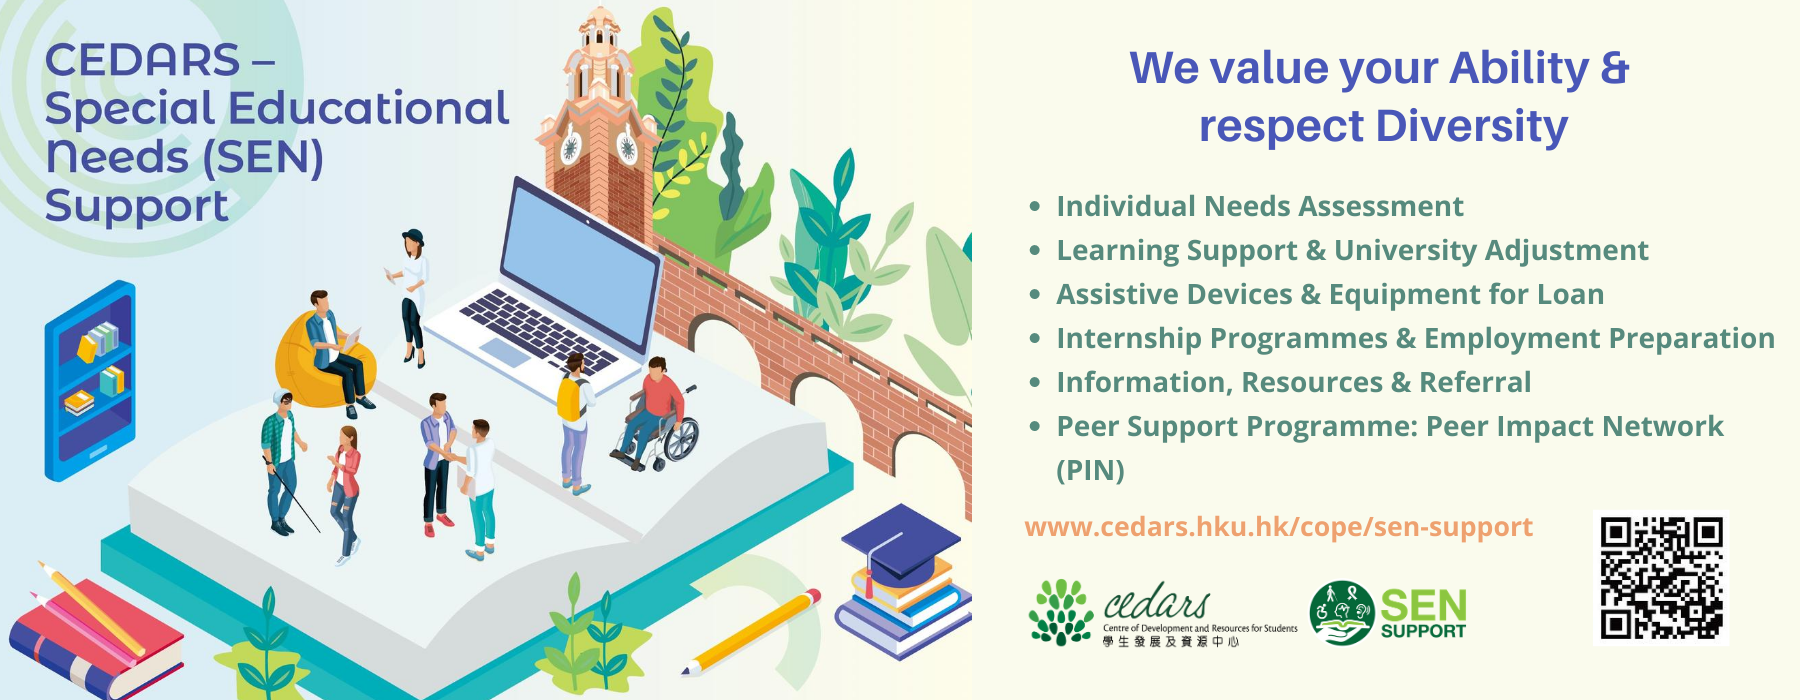 home page banner with 6 domains of CEDARS SEN Support, indvidual needs assessment, learning support & university adjustment ,assistive device & equipment for loan, internship programme  & employment preparation, information, resources and referral, Peer Support Programme: Peer Impact Network (PIN)